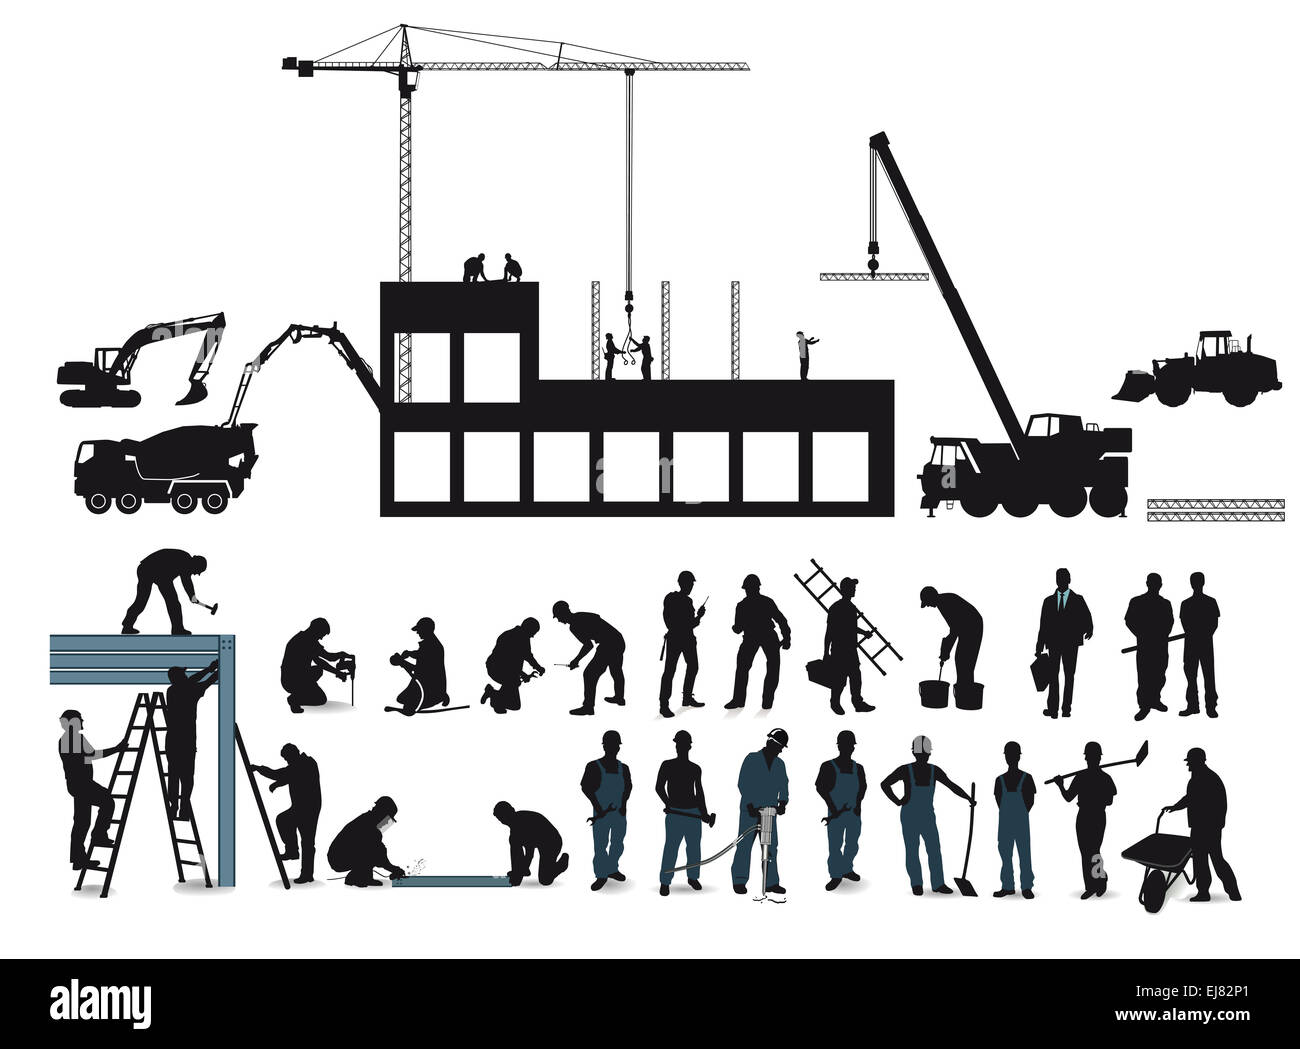 Construction project with construction workers Stock Photo